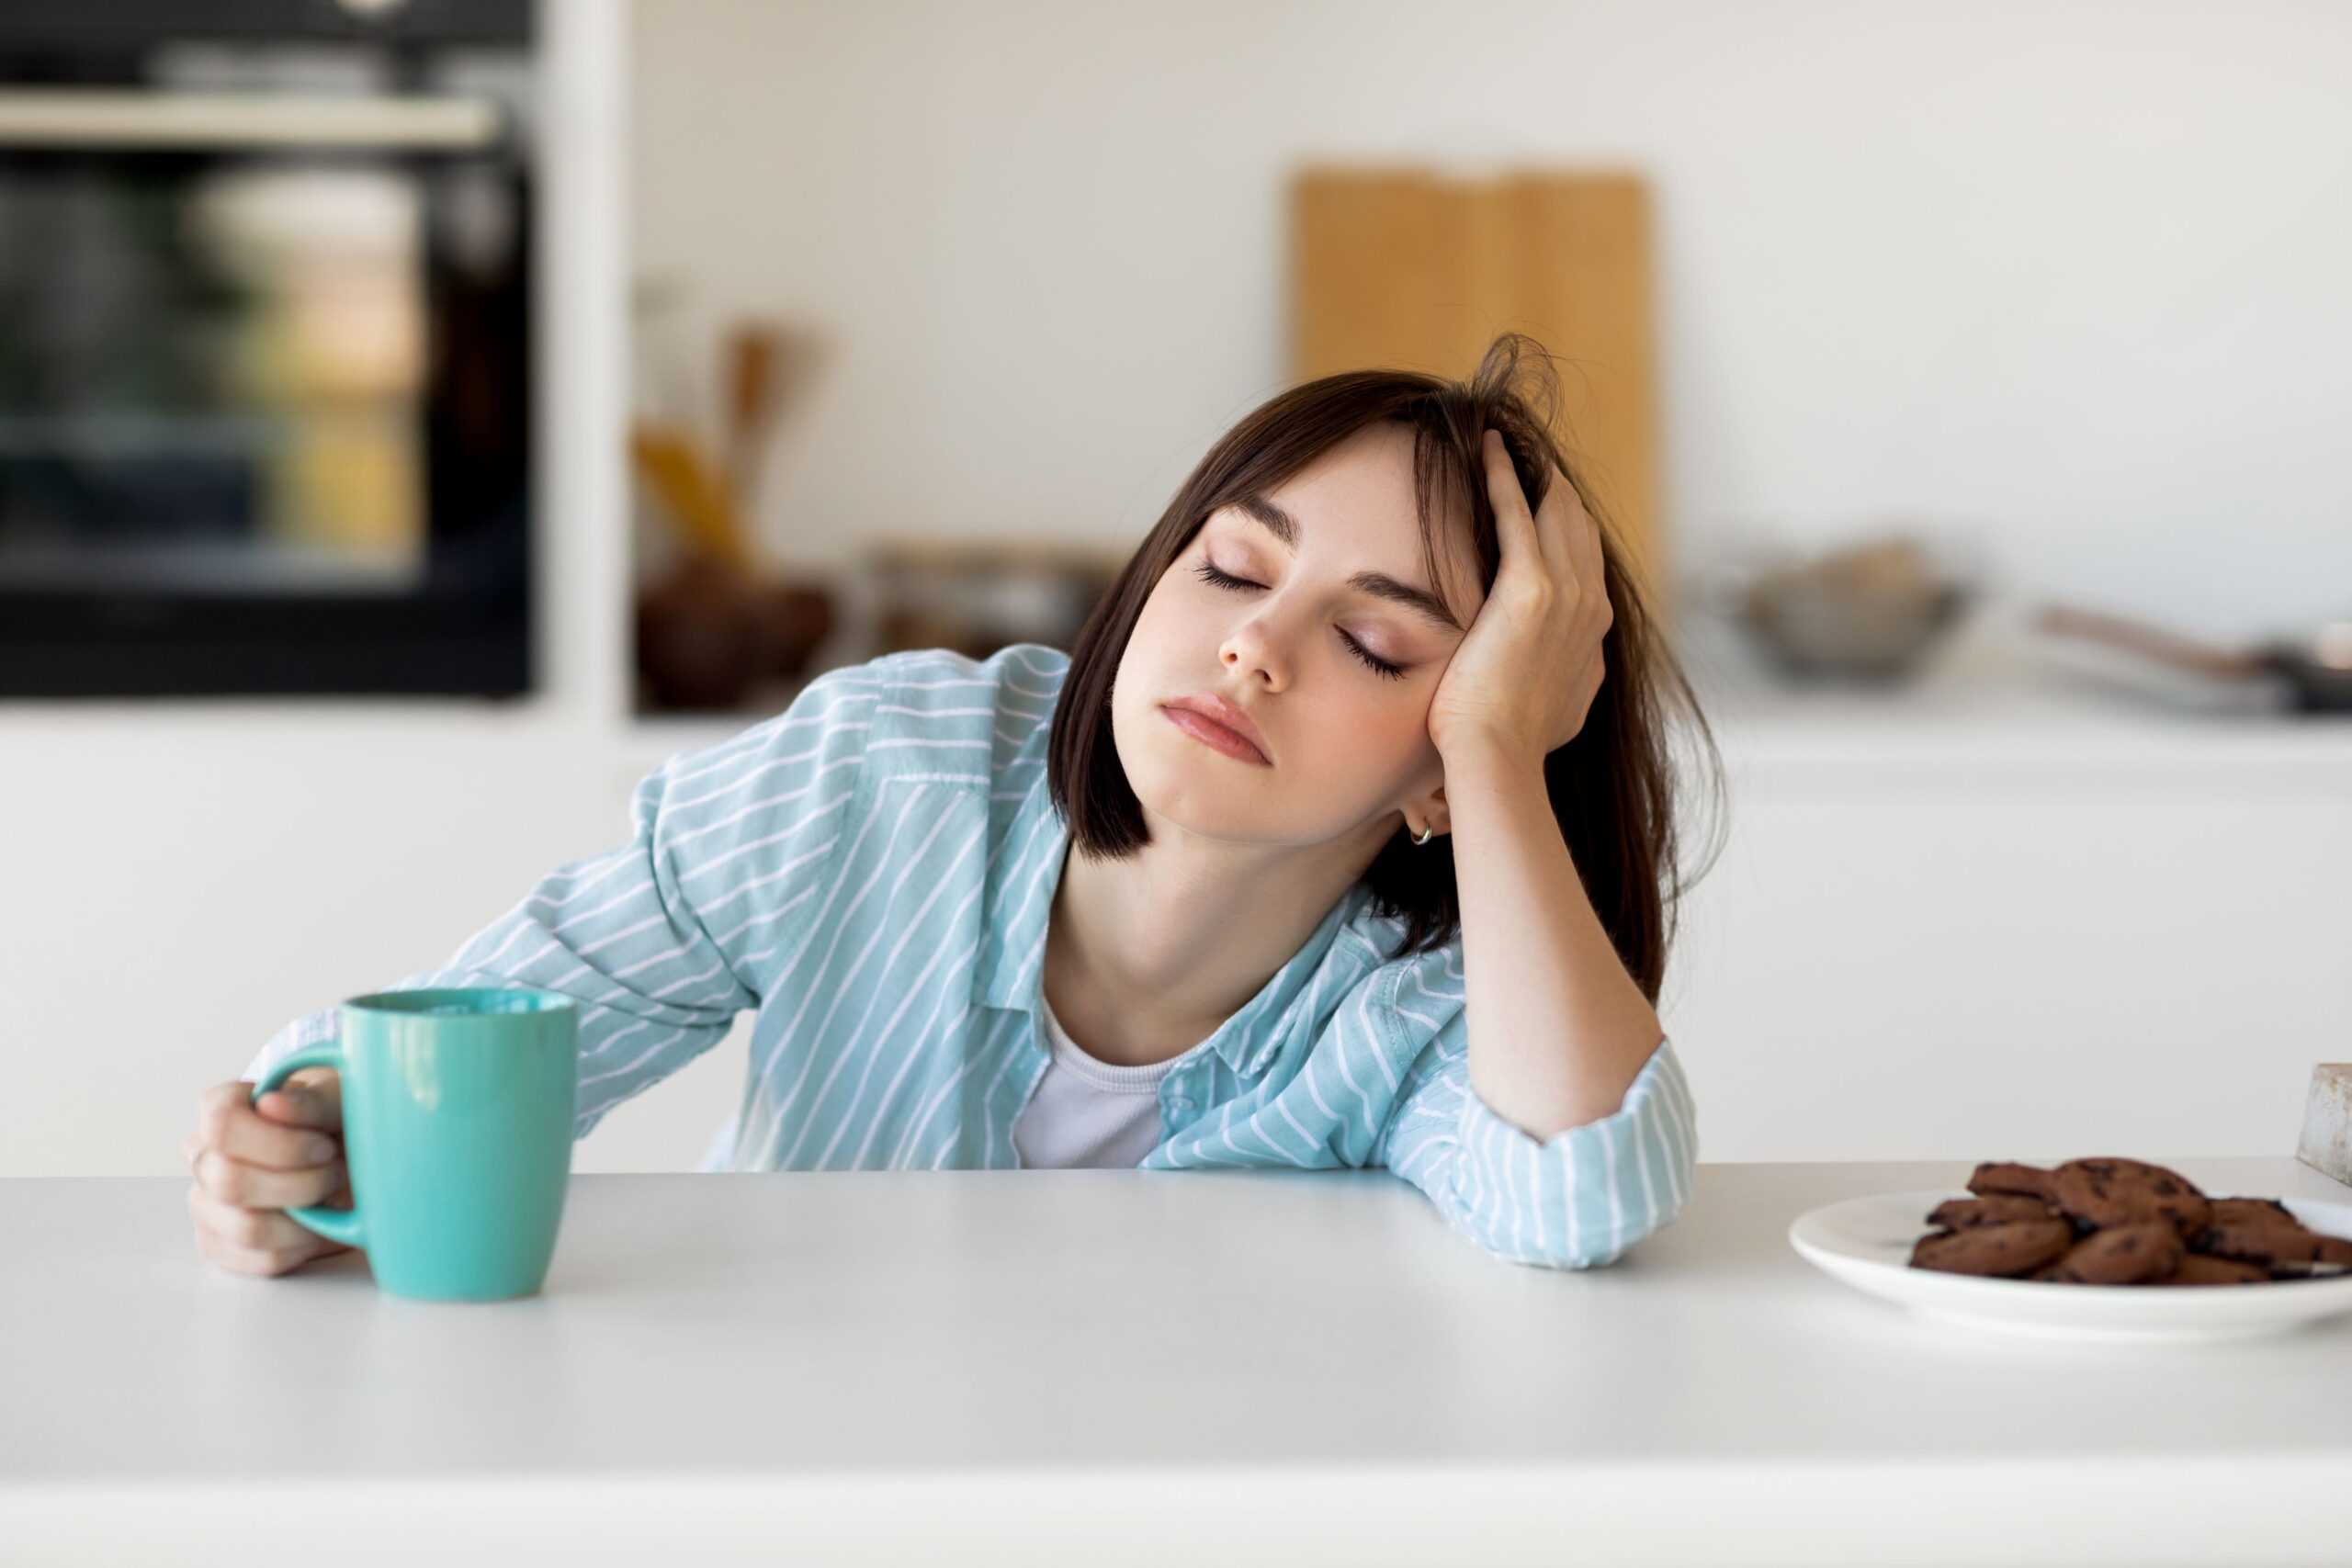 Woman sitting at a table falling asleep with coffee mug in her hand